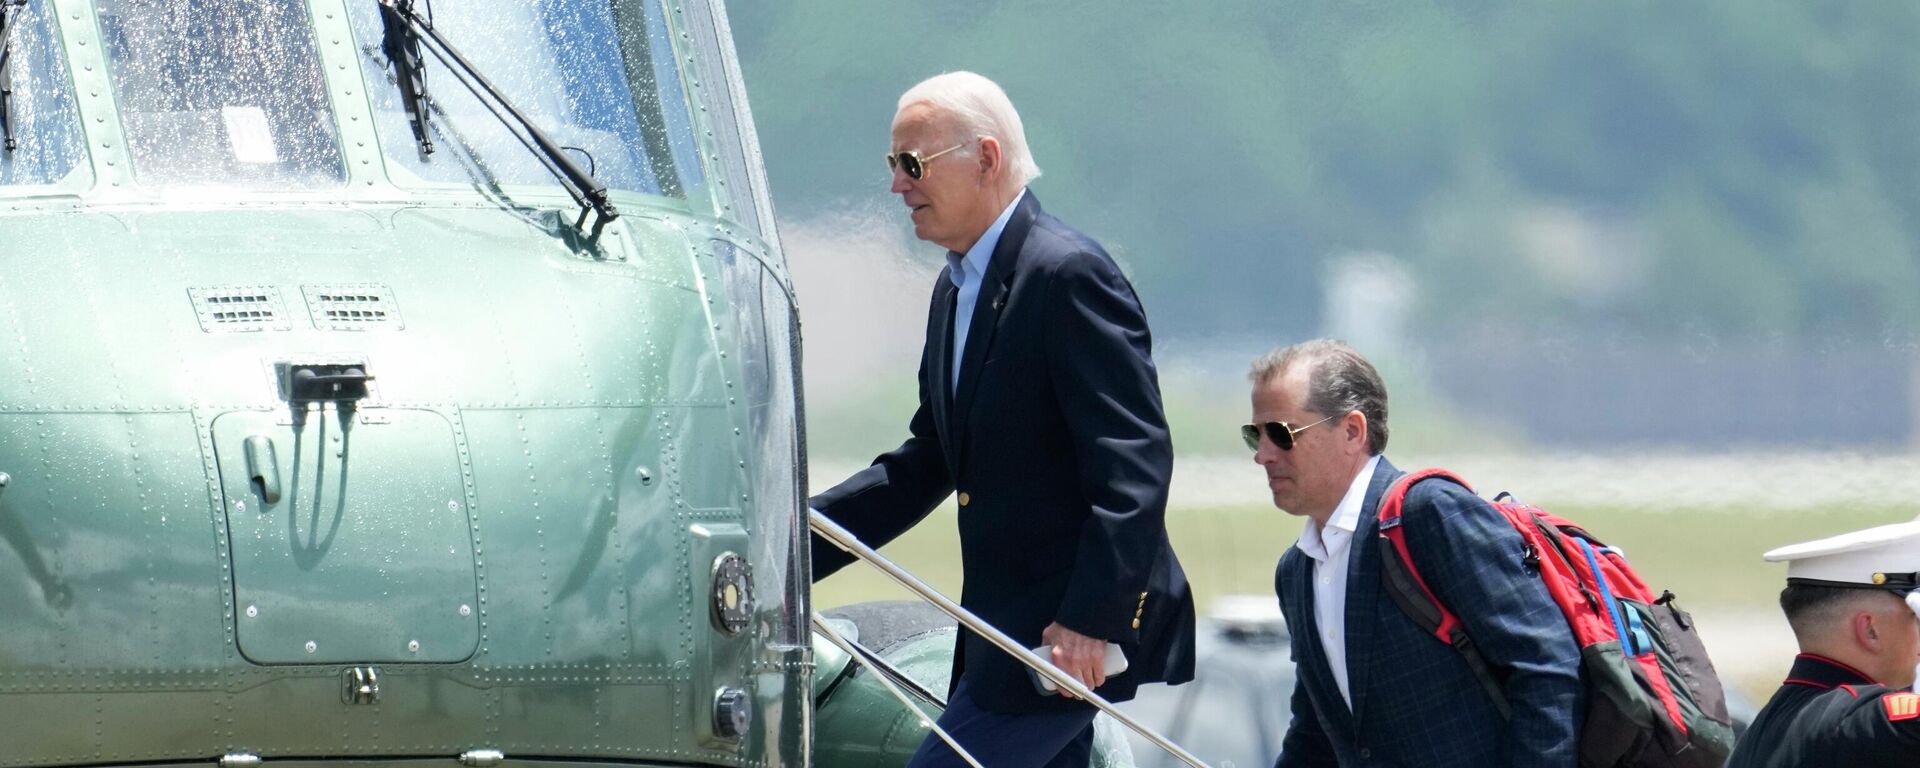 President Joe Biden boards Marine One with his son Hunter Biden as he leaves Andrews Air Force Base, Md., on his way to Camp David, Saturday, June 24, 2023 - Sputnik Africa, 1920, 26.10.2023